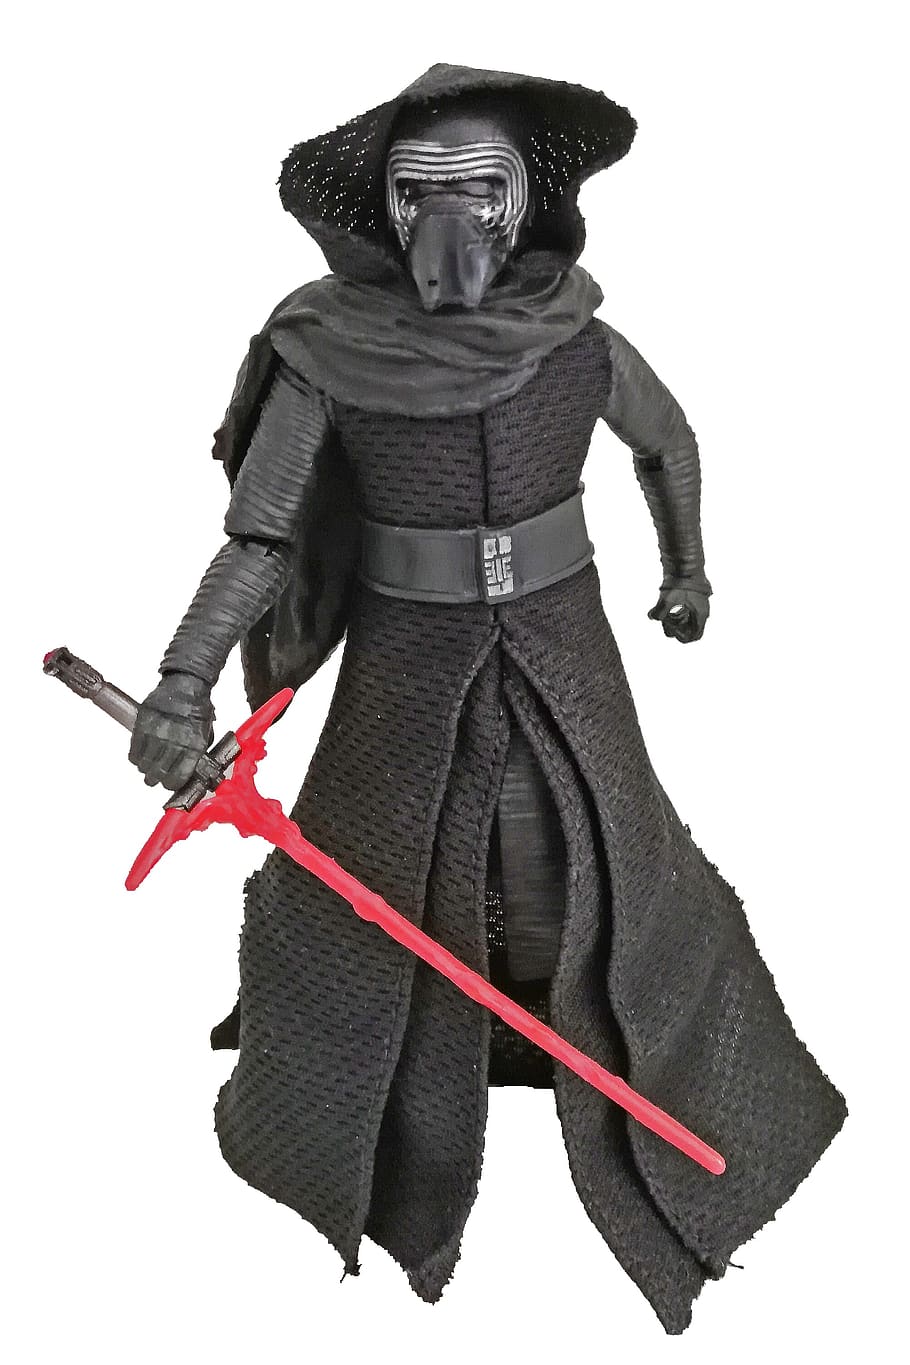 action figure, toys, figure, play, children toys, star wars, kylo ren, collect, collector, superhero